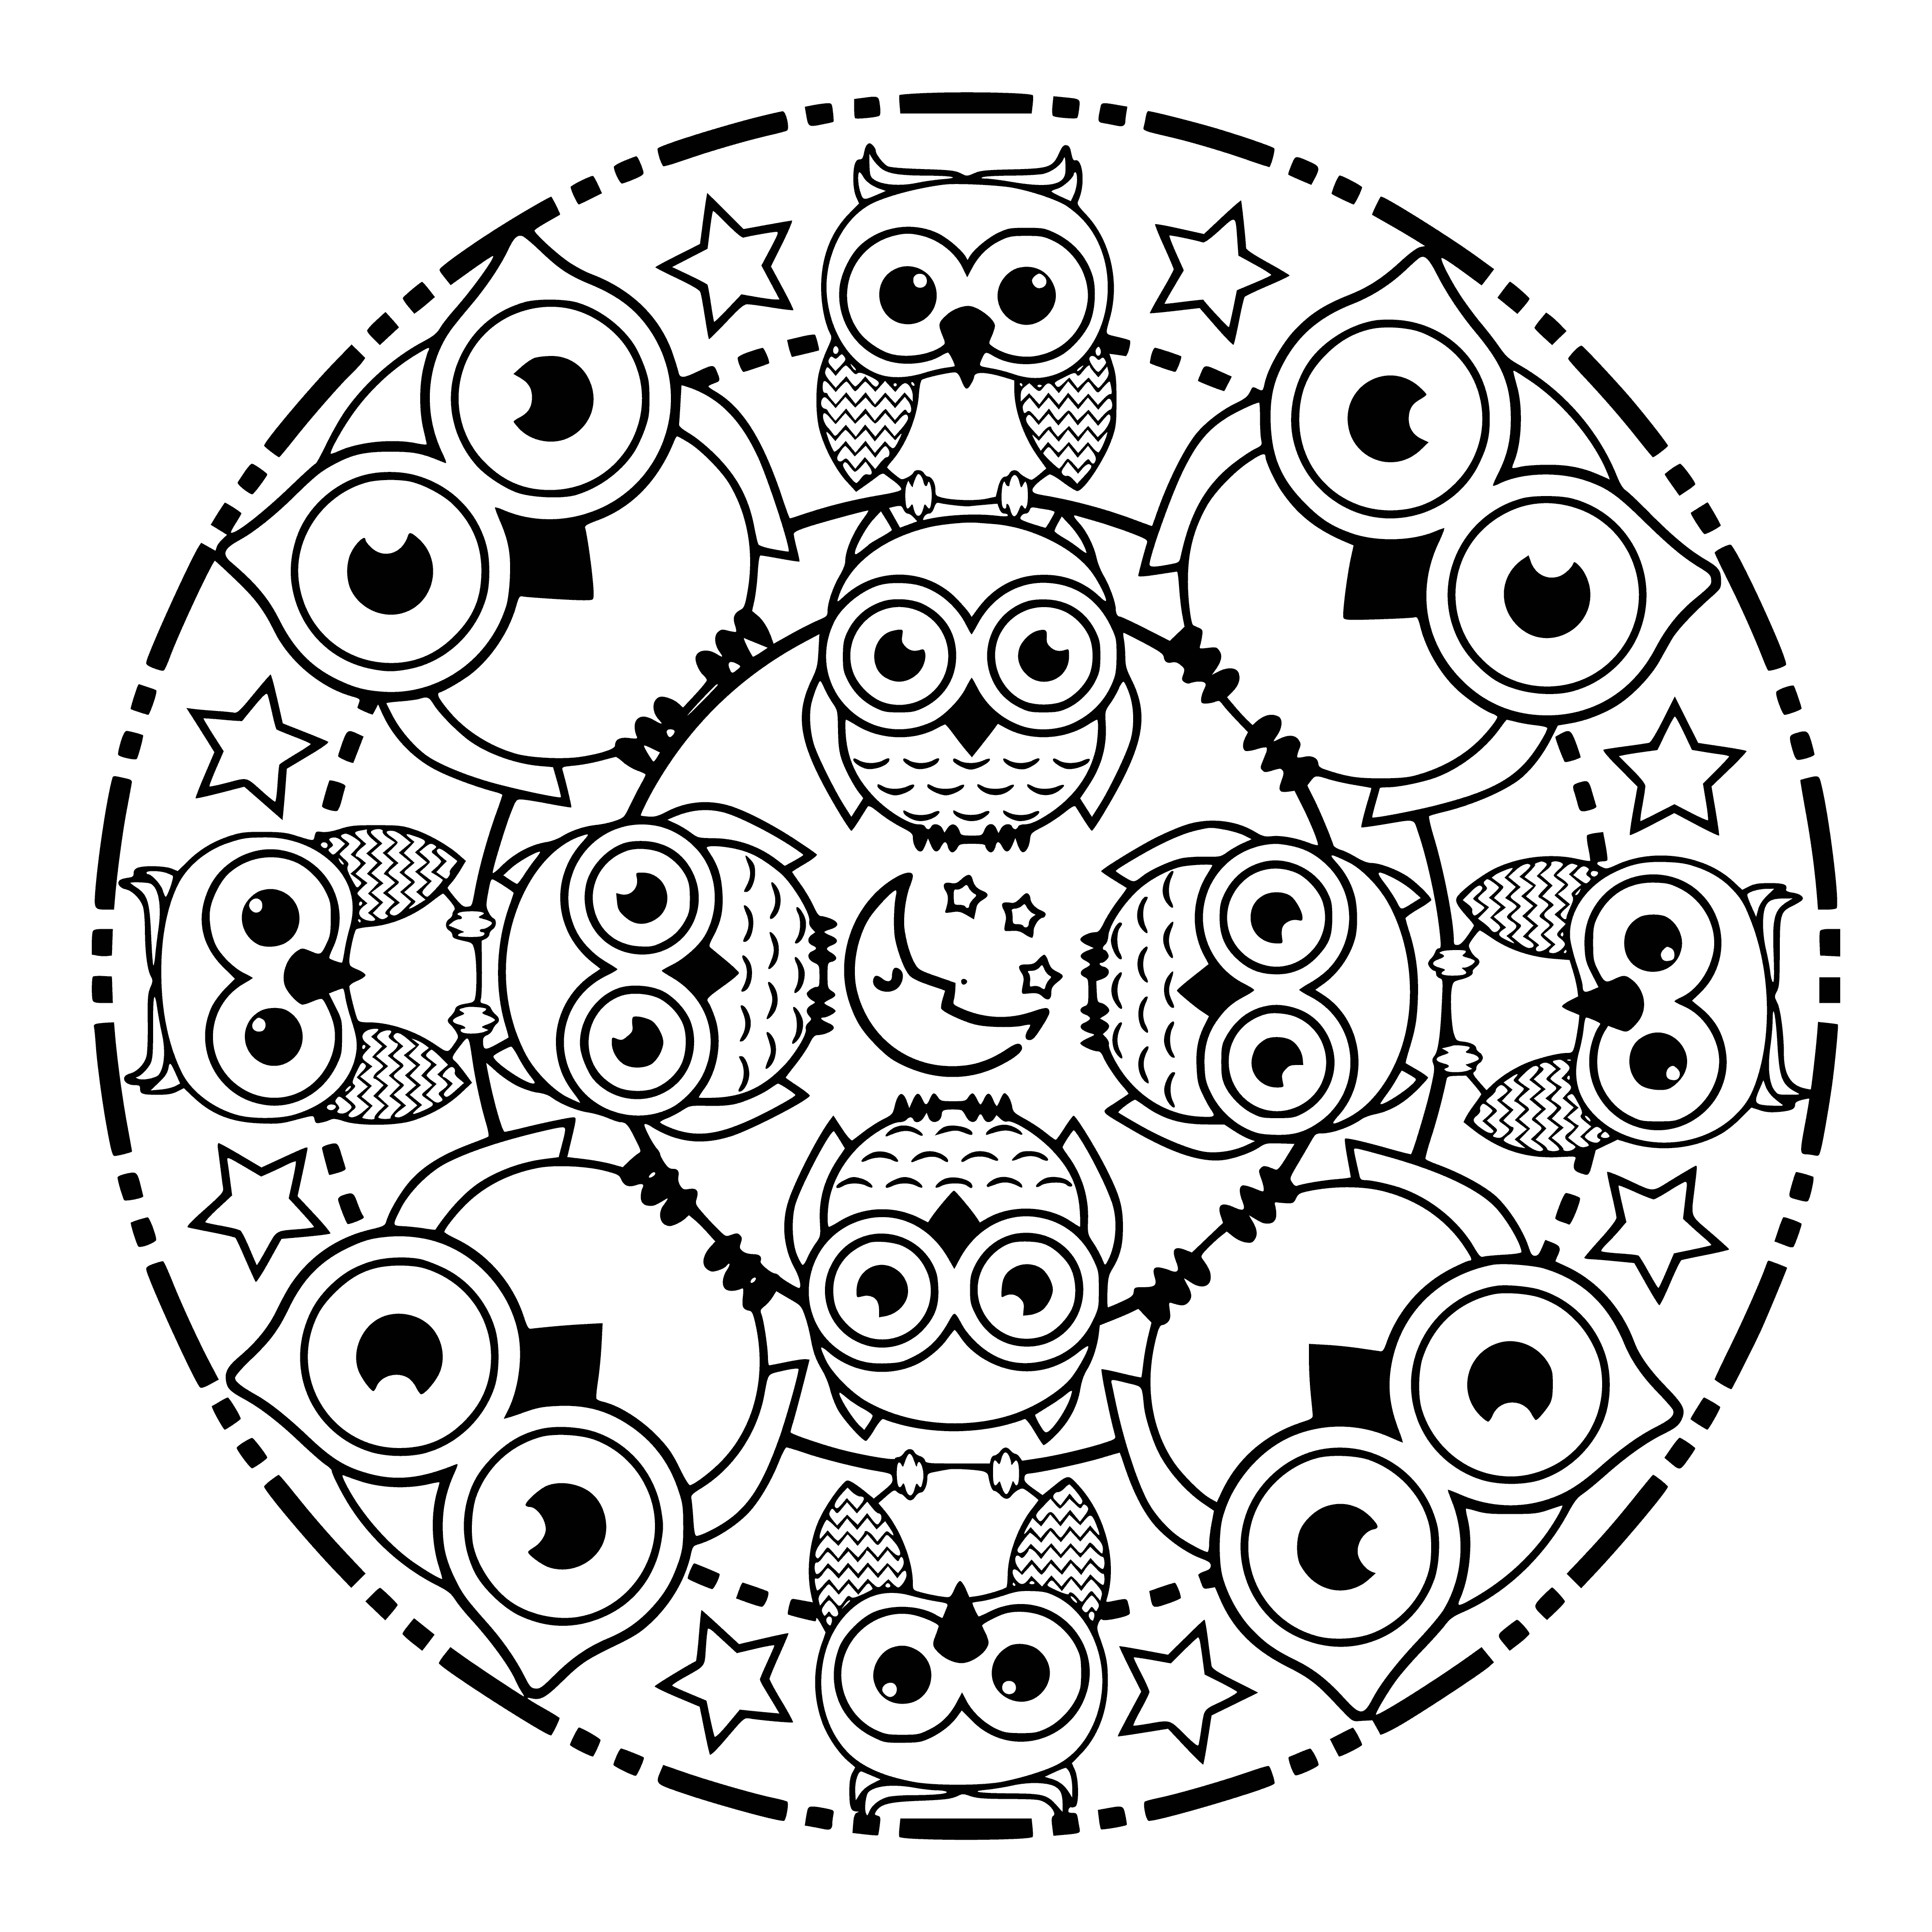 Mandala with owls coloring page